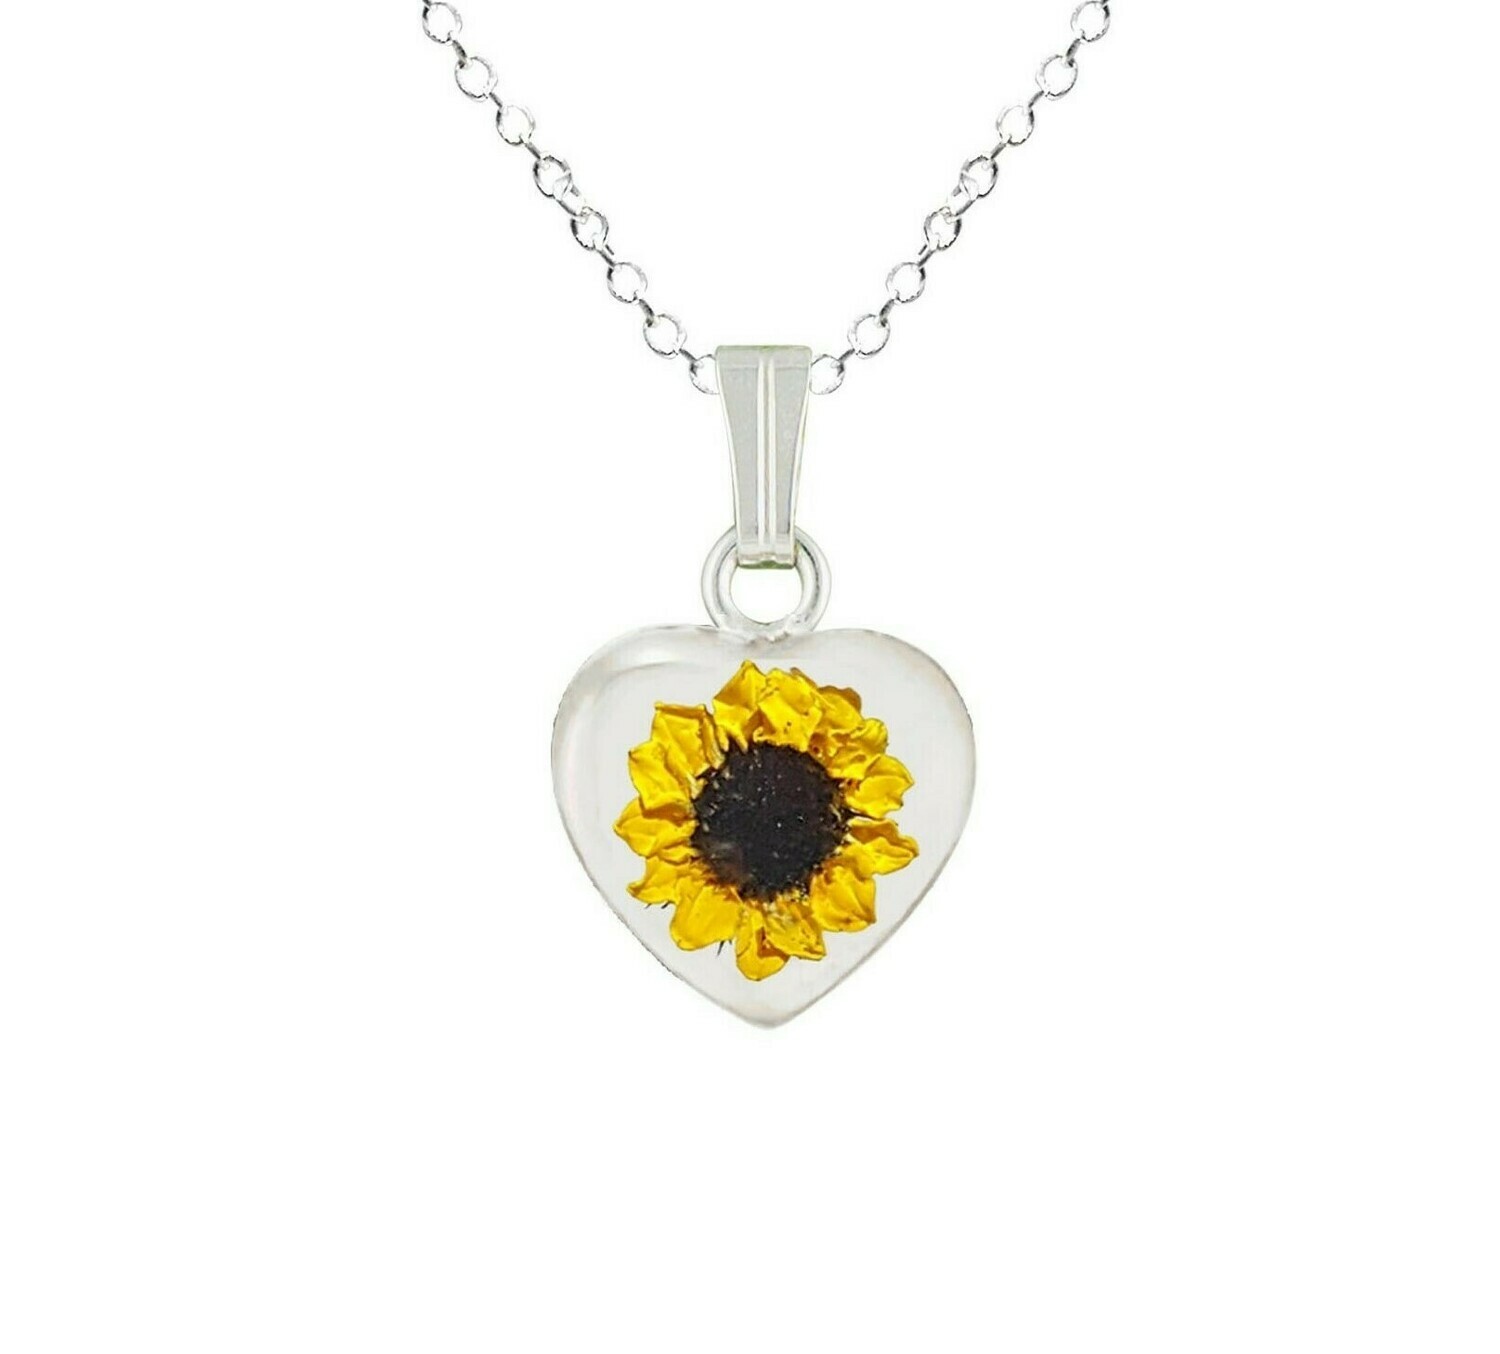 Sunflower Necklace, Small Heart, White Background